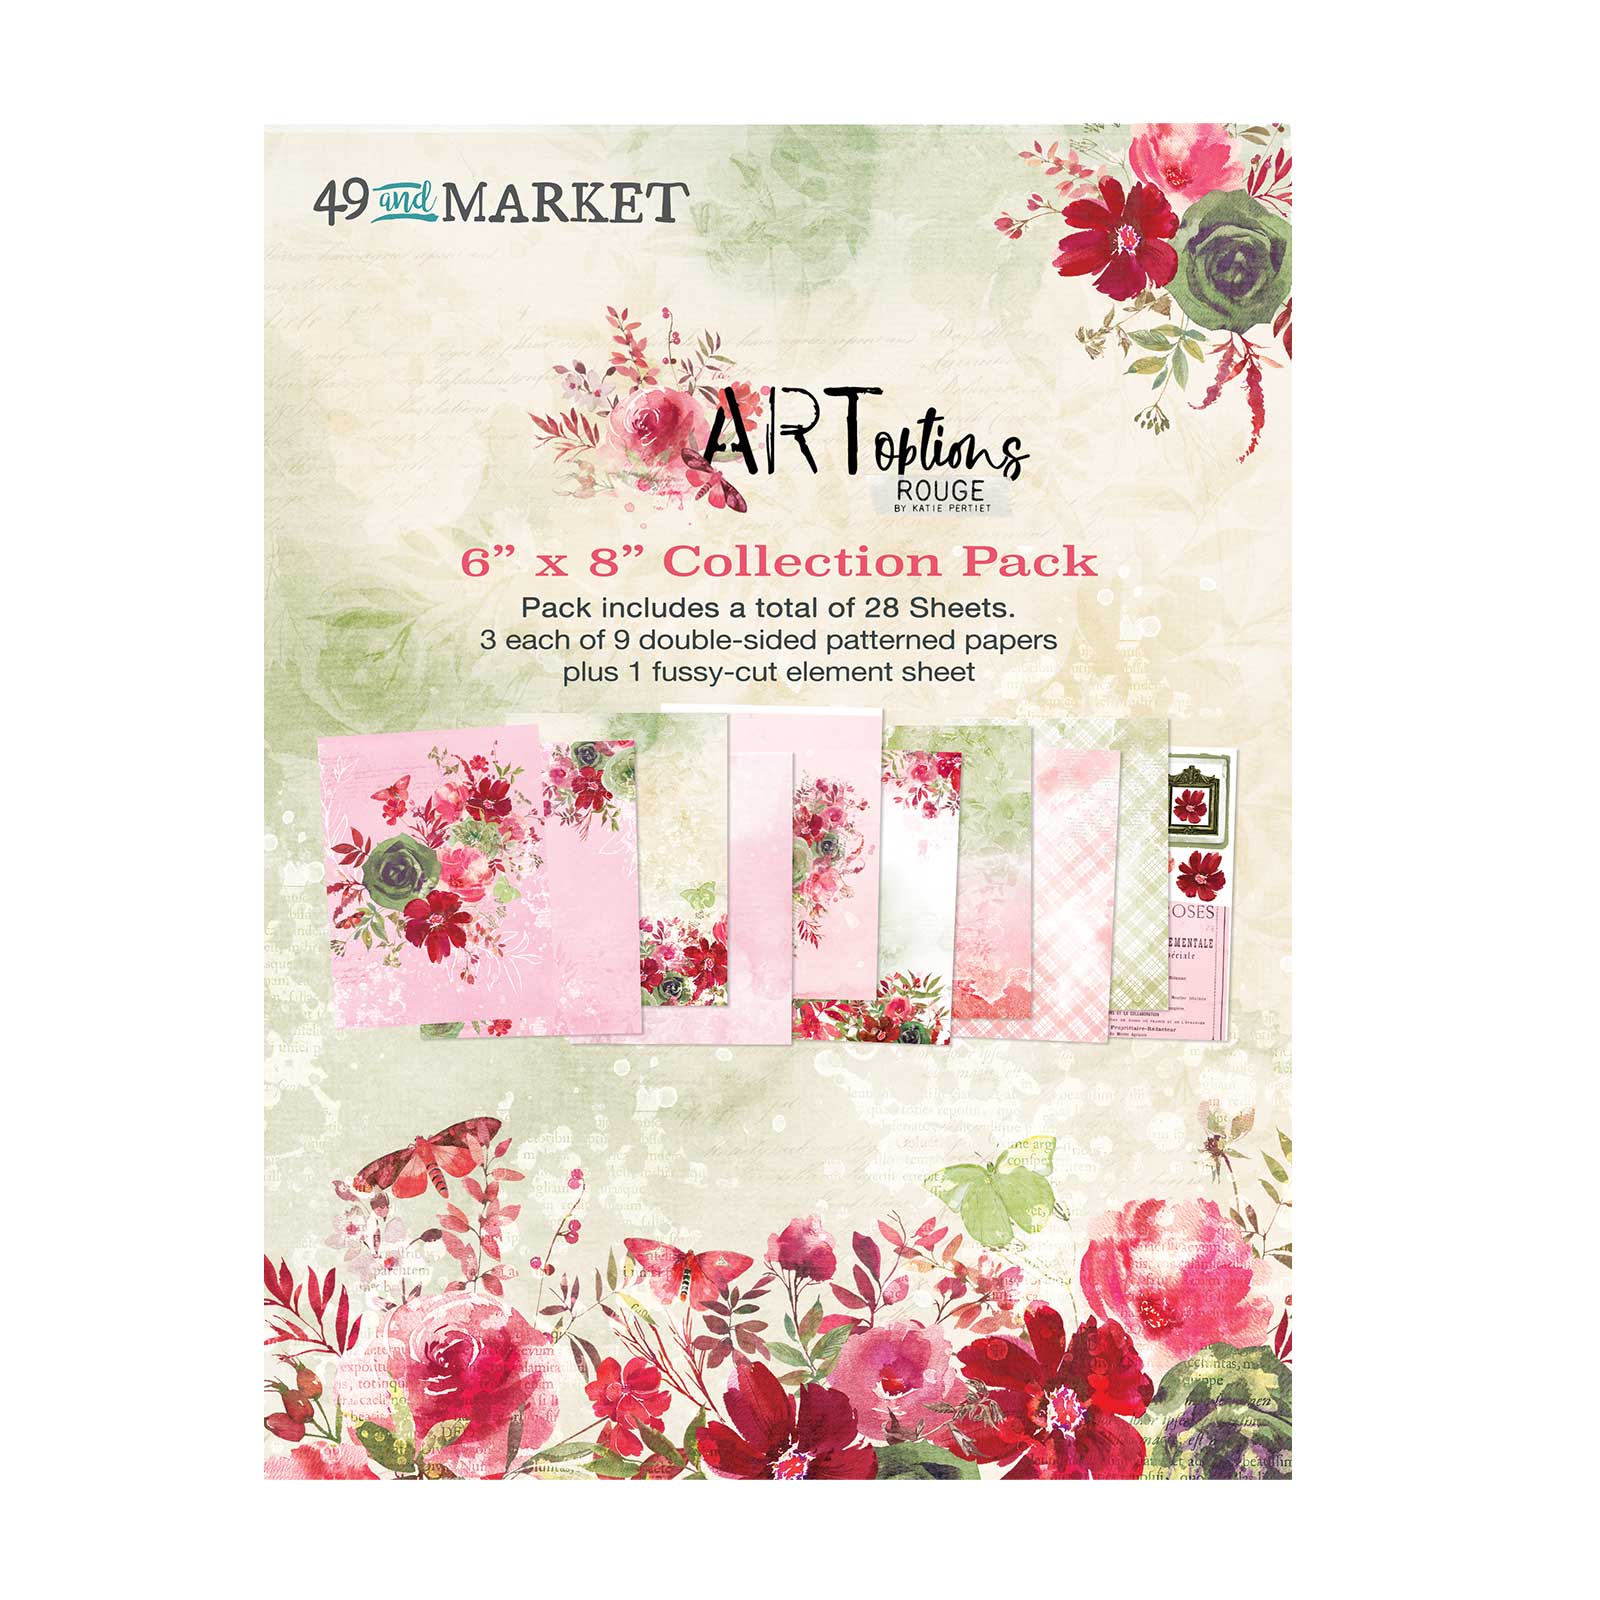 Maker Mania 9: 6x8 Art Rouge Paper $15.99+taxes